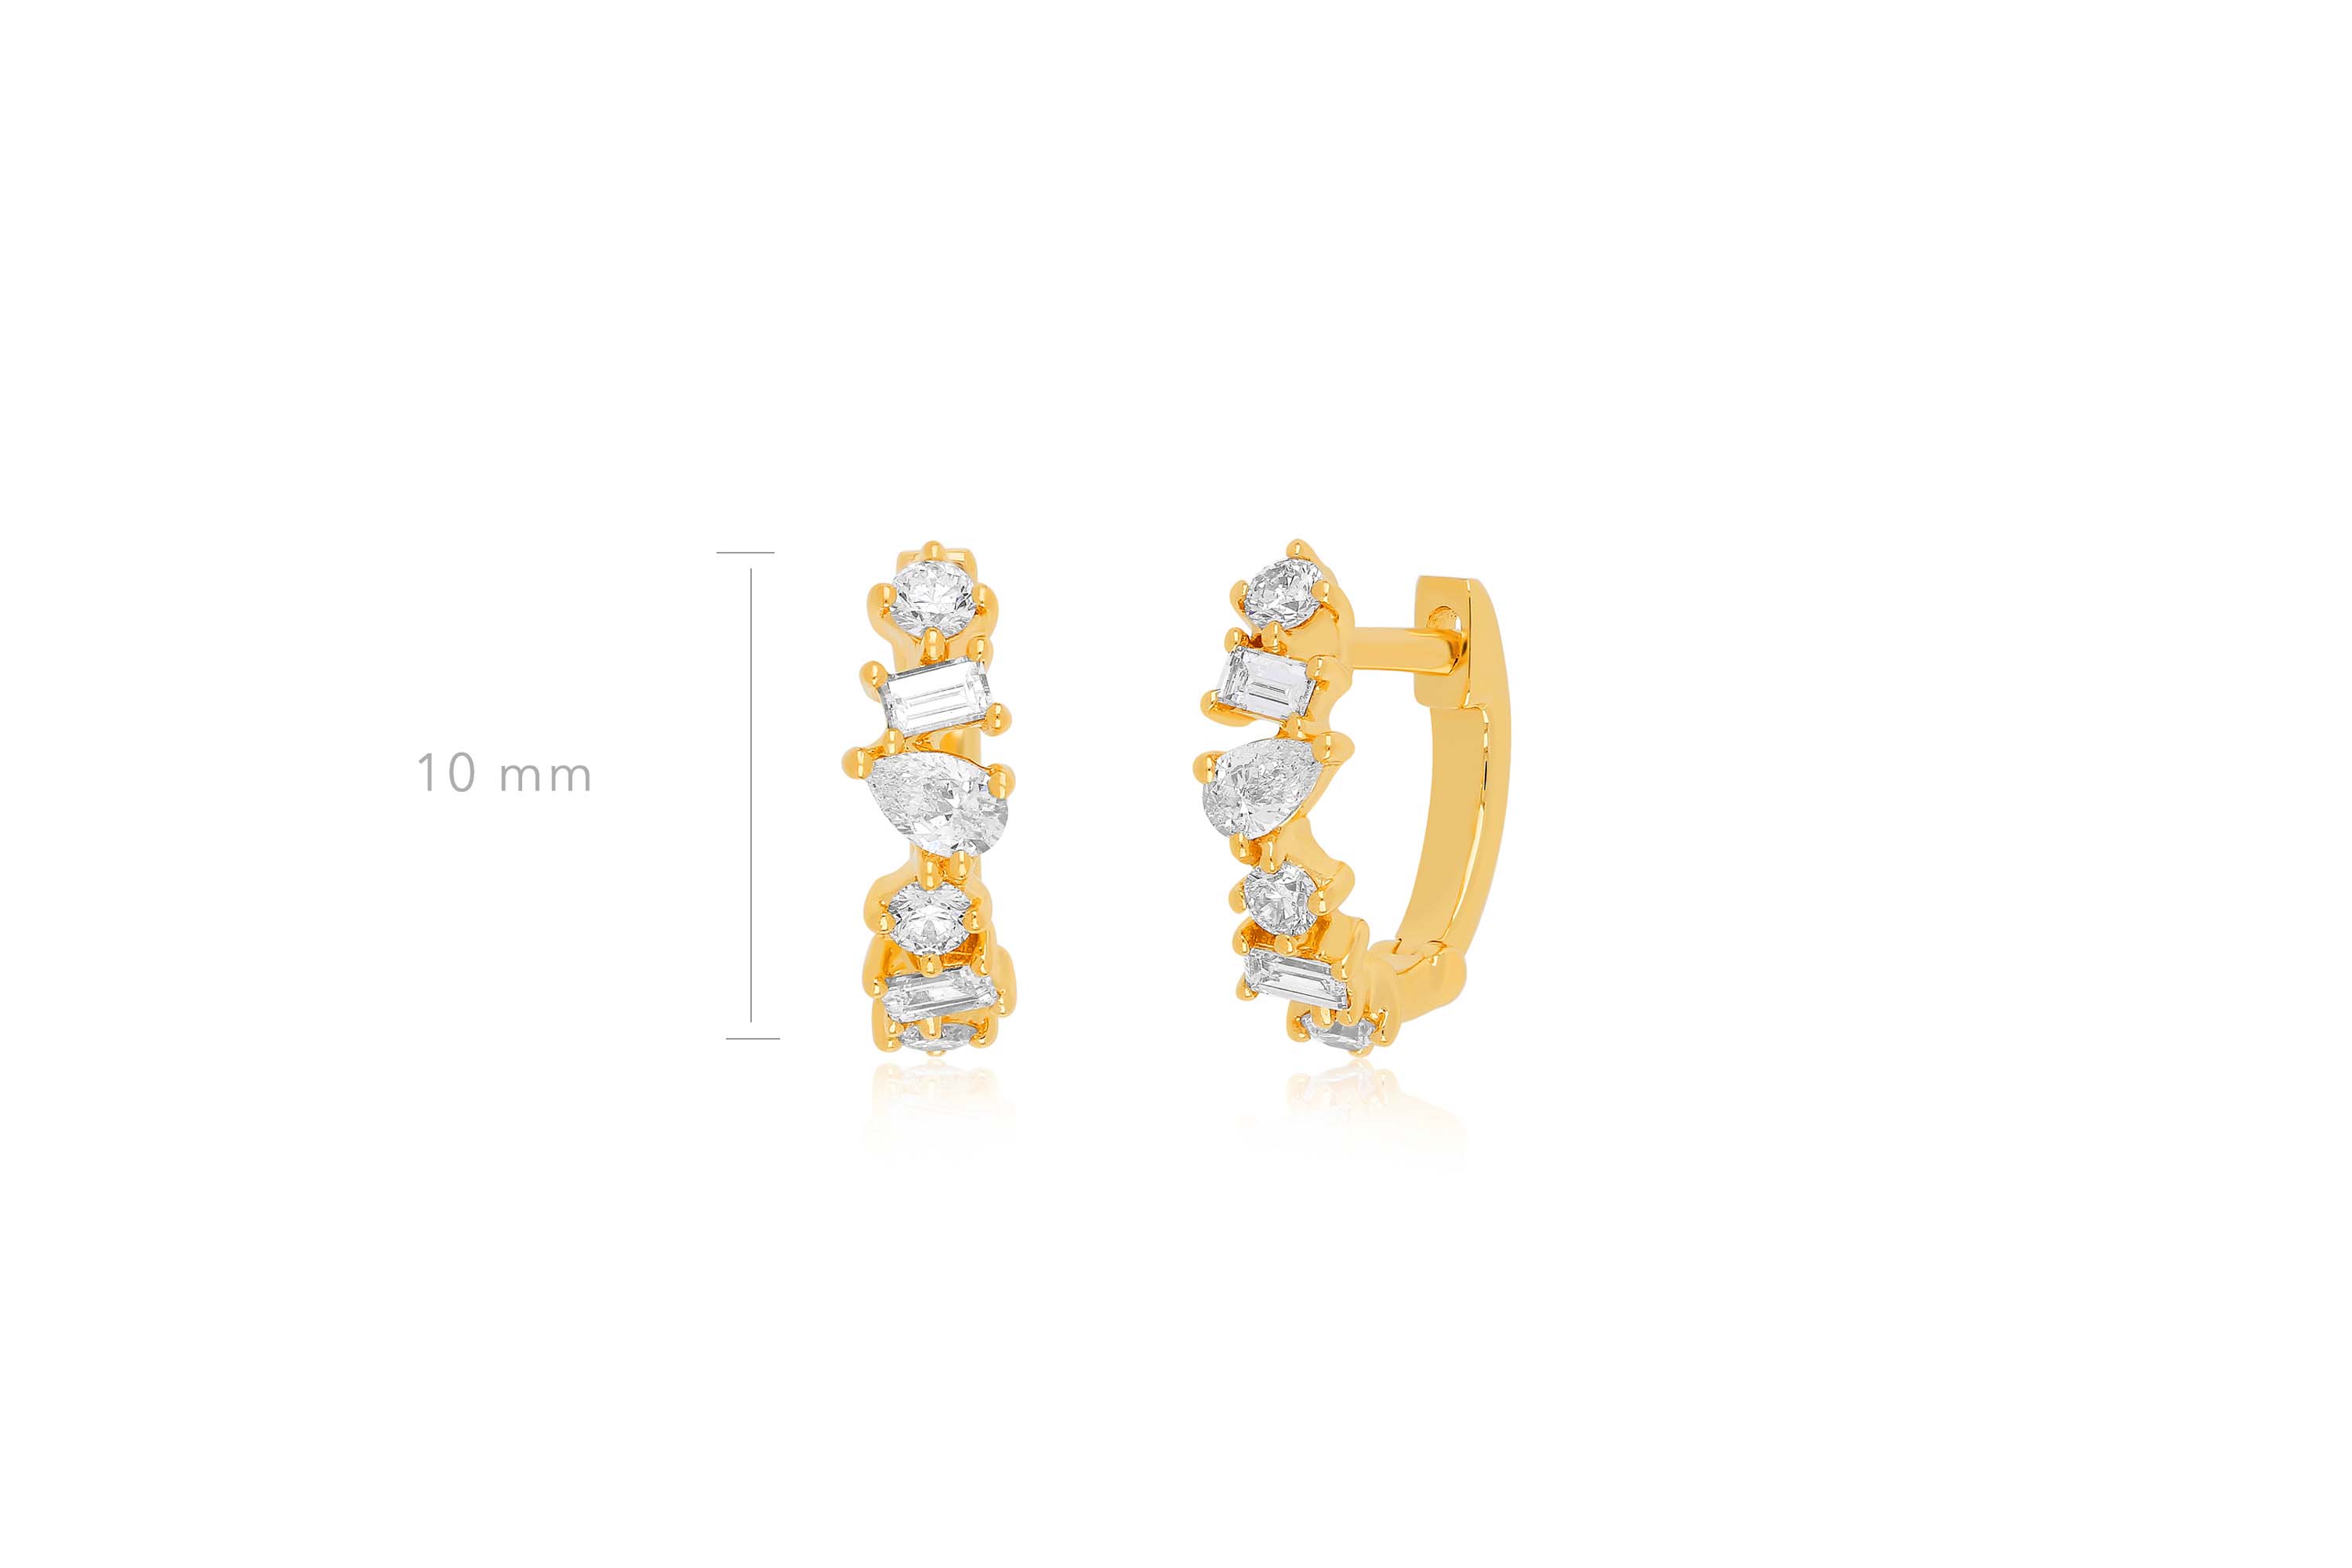 Multi Faceted Diamond Mini Huggie Earring in 14k yellow gold with size measurement of 10mm height